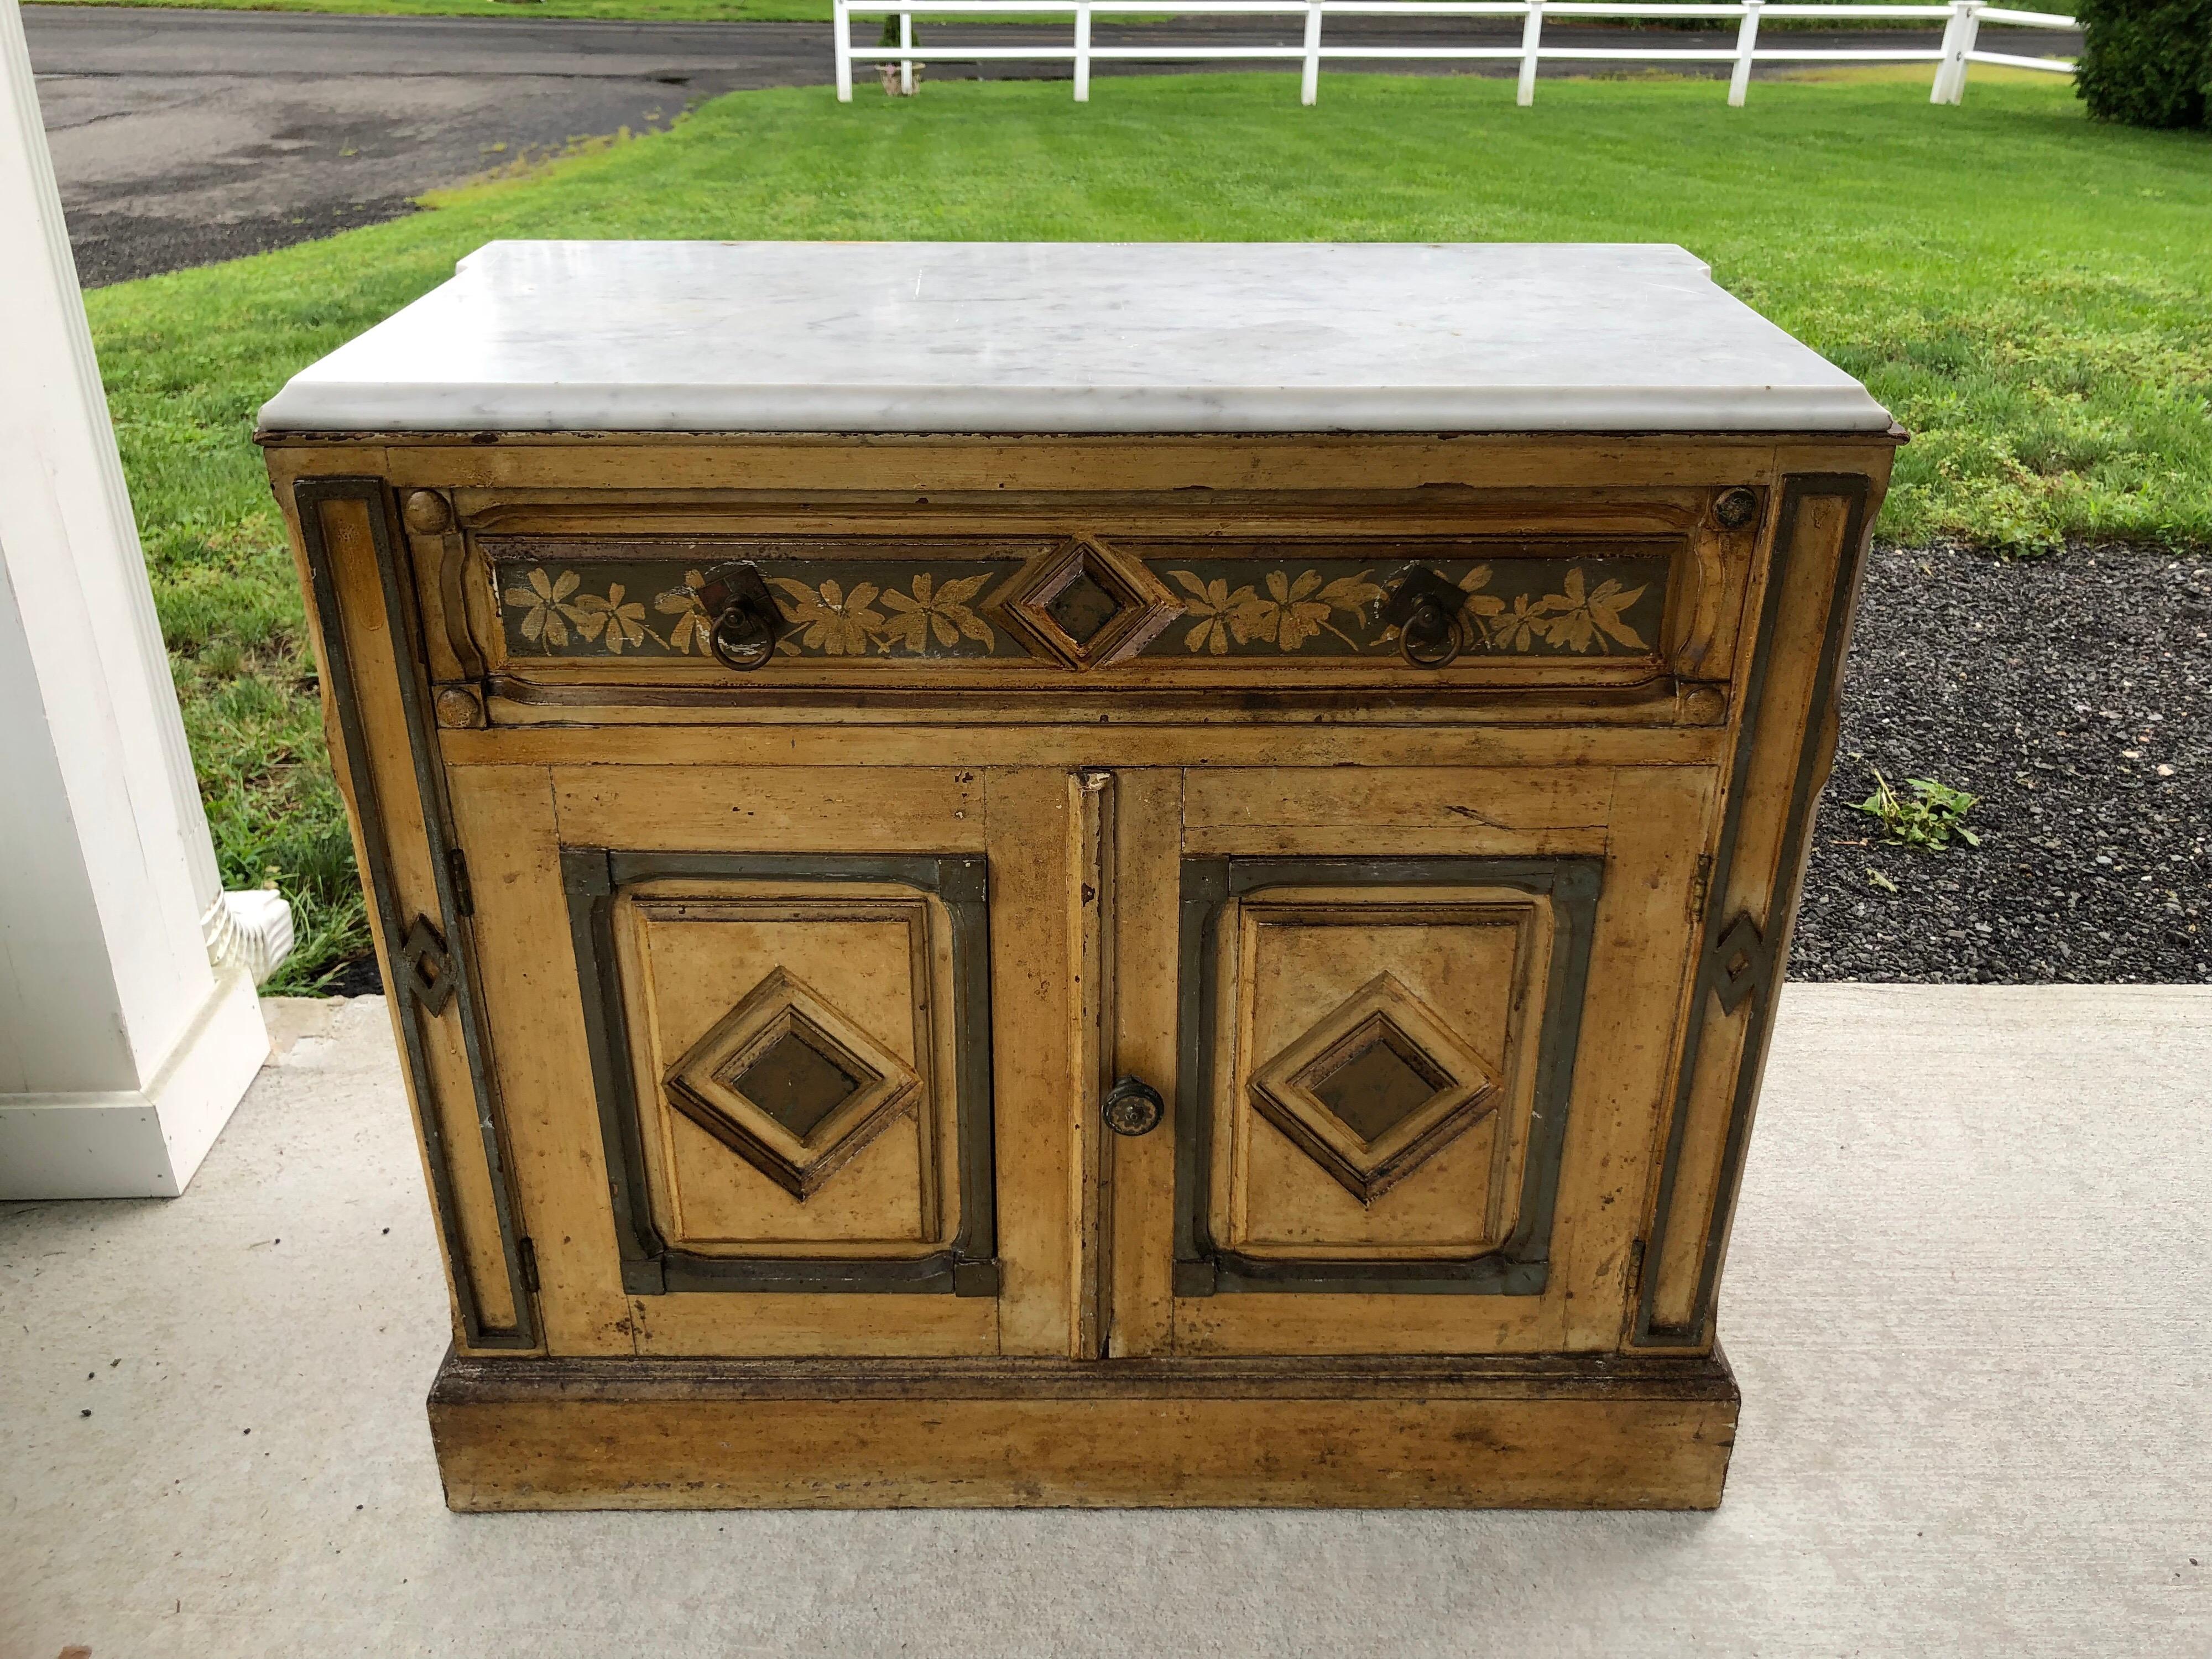 Victorian cottage style hand-painted marble top dresser. This sweet dresser would complement any country farmhouse or cottage. Hand-painted panels grace this lovely Victorian era piece that is topped with a loose white marble with beveled edges. Two